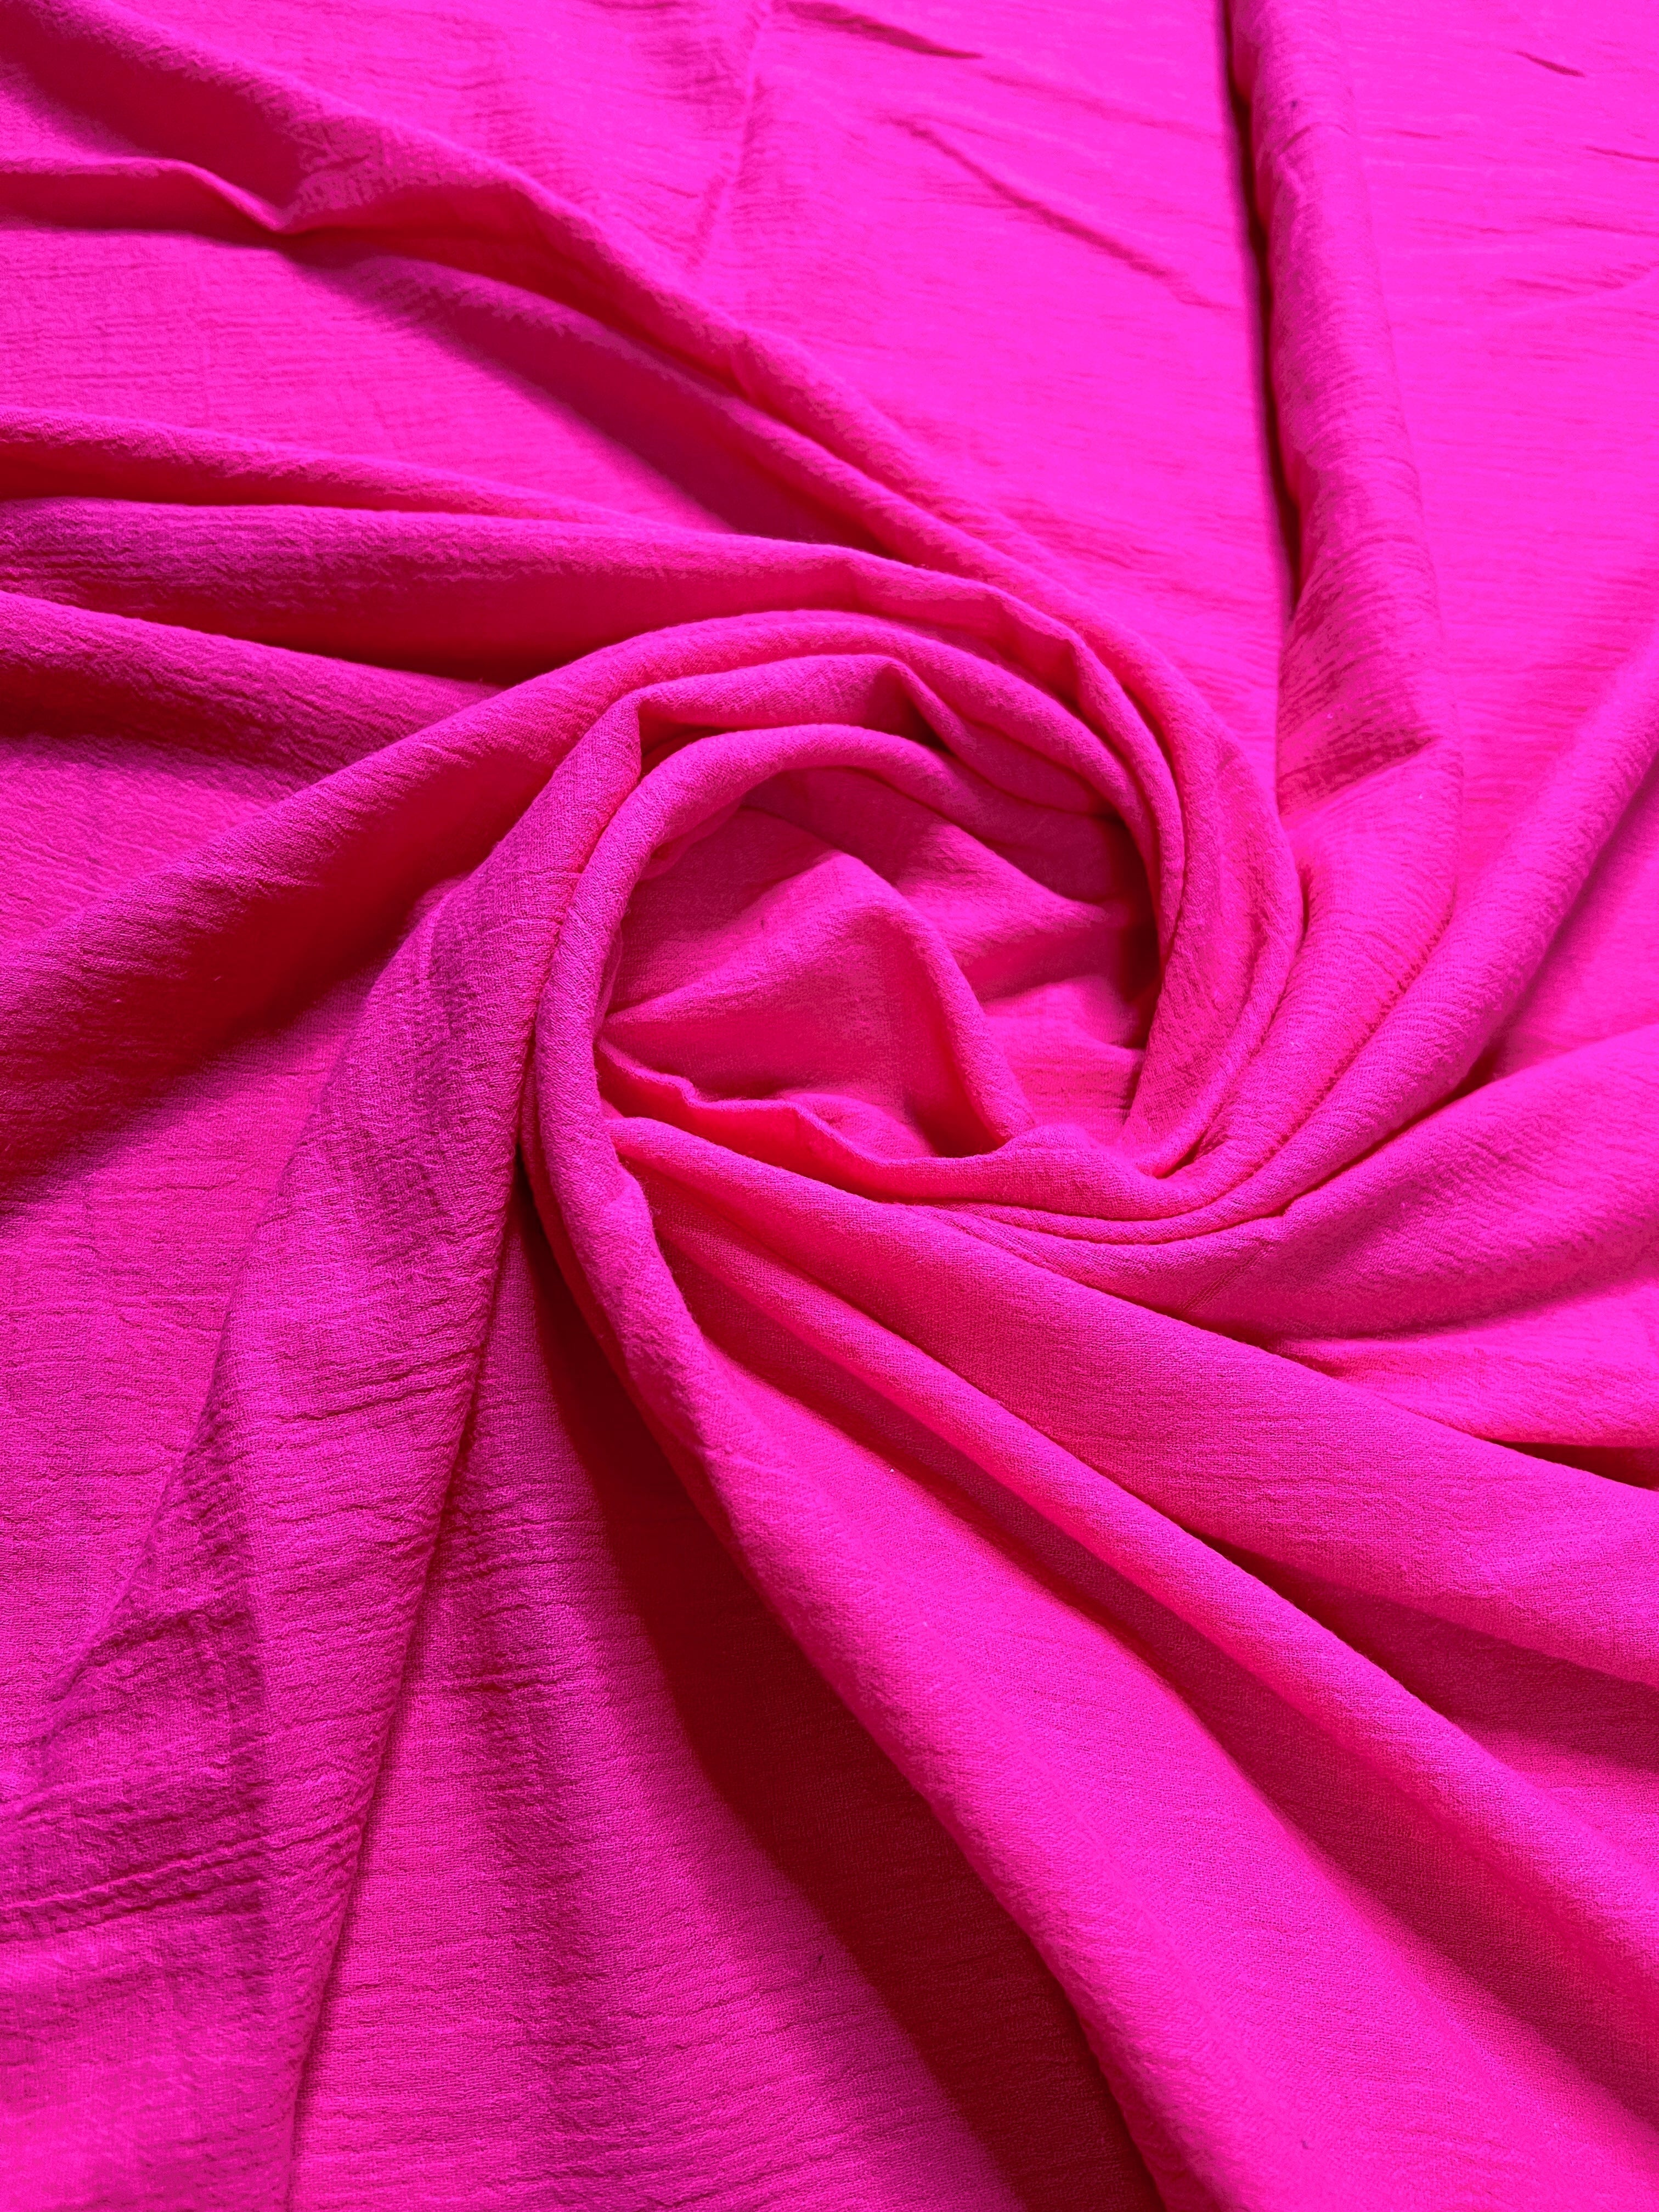 hot pink Cotton Gauze, cotton gauze fabric, pink gauze fabric, light pink gauze, cotton for woman, double gauze cheap, coton gauze for bride, cotton gauze in low price